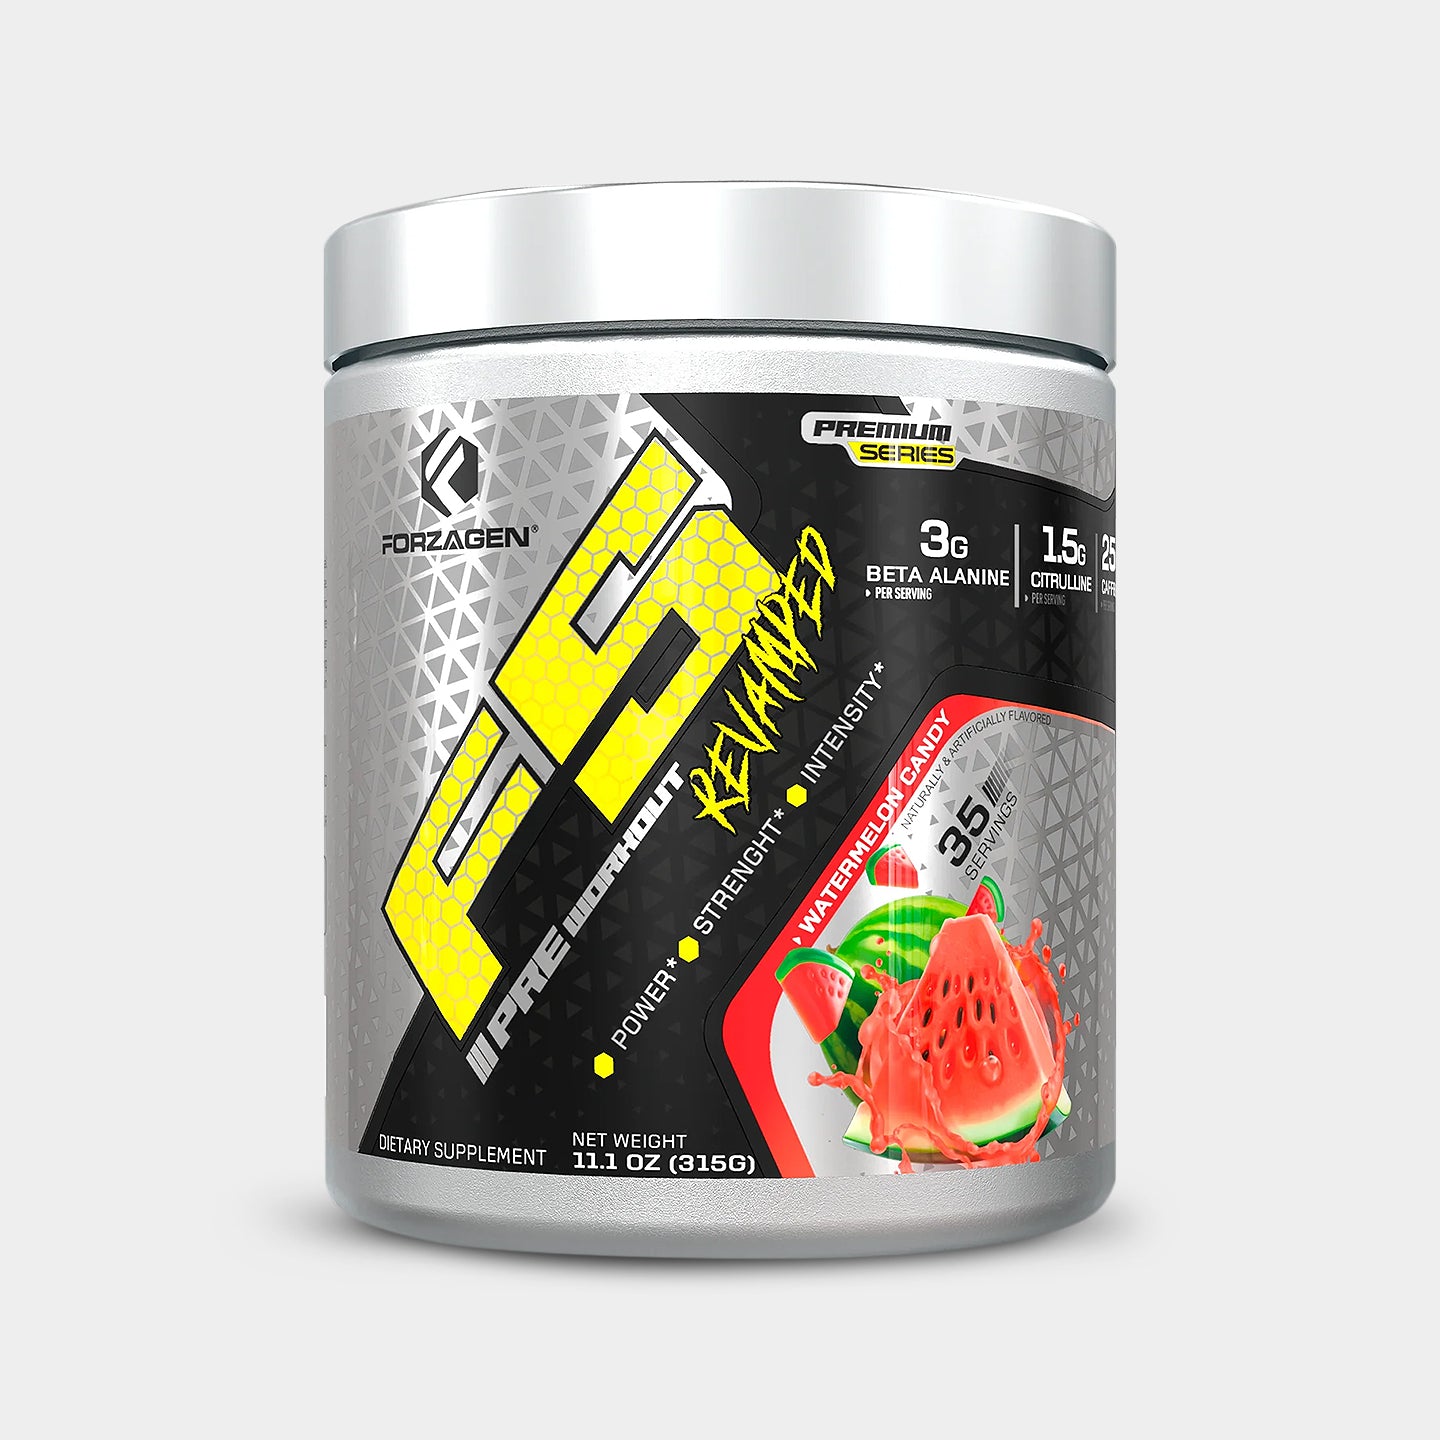 Forzagen F5 Pre-Workout, Watermelon Candy, 35 Servings A1